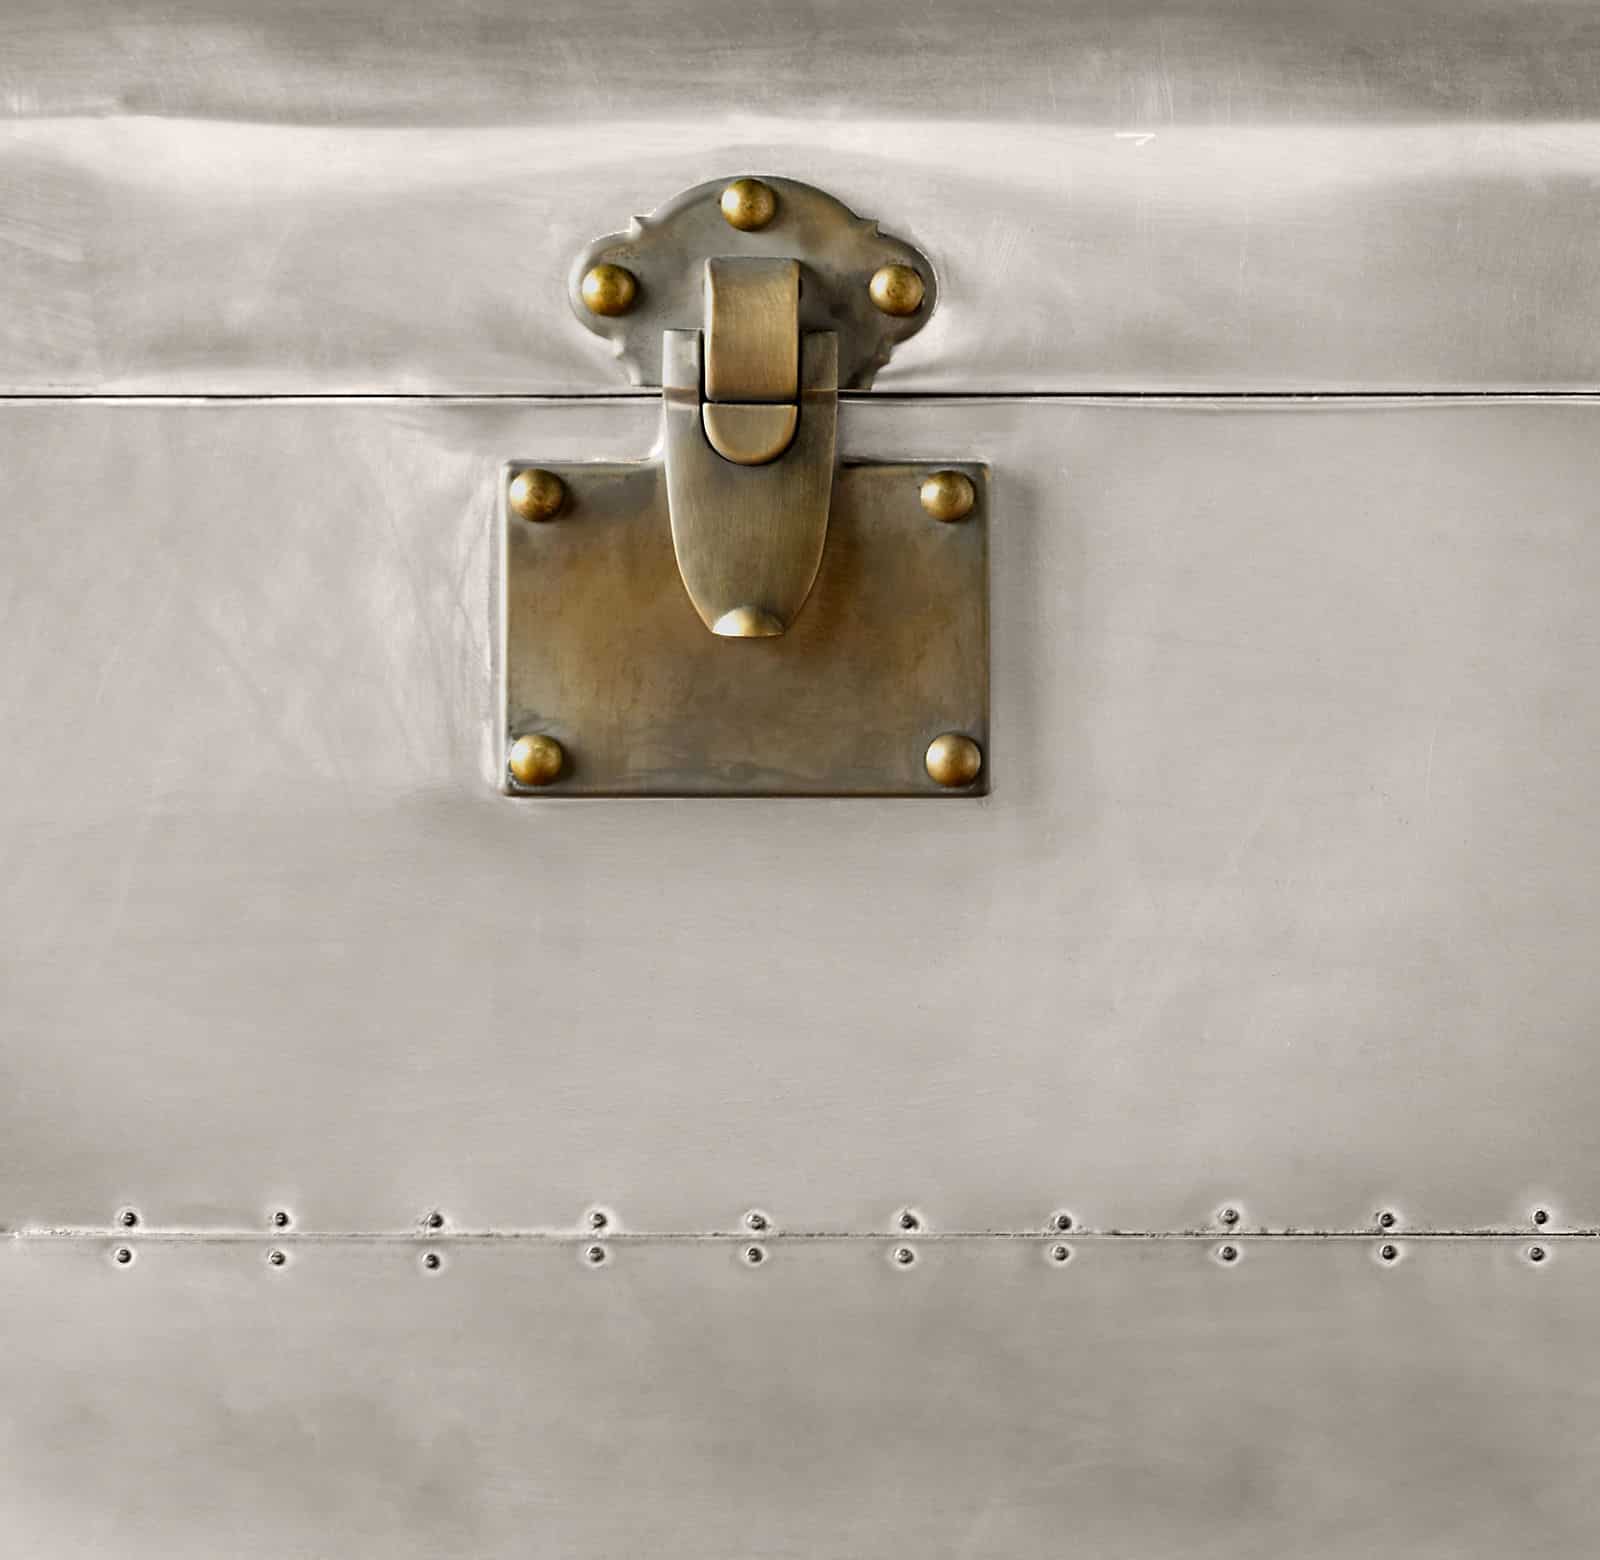 The messing lock of an Aviator trunk cabinet design